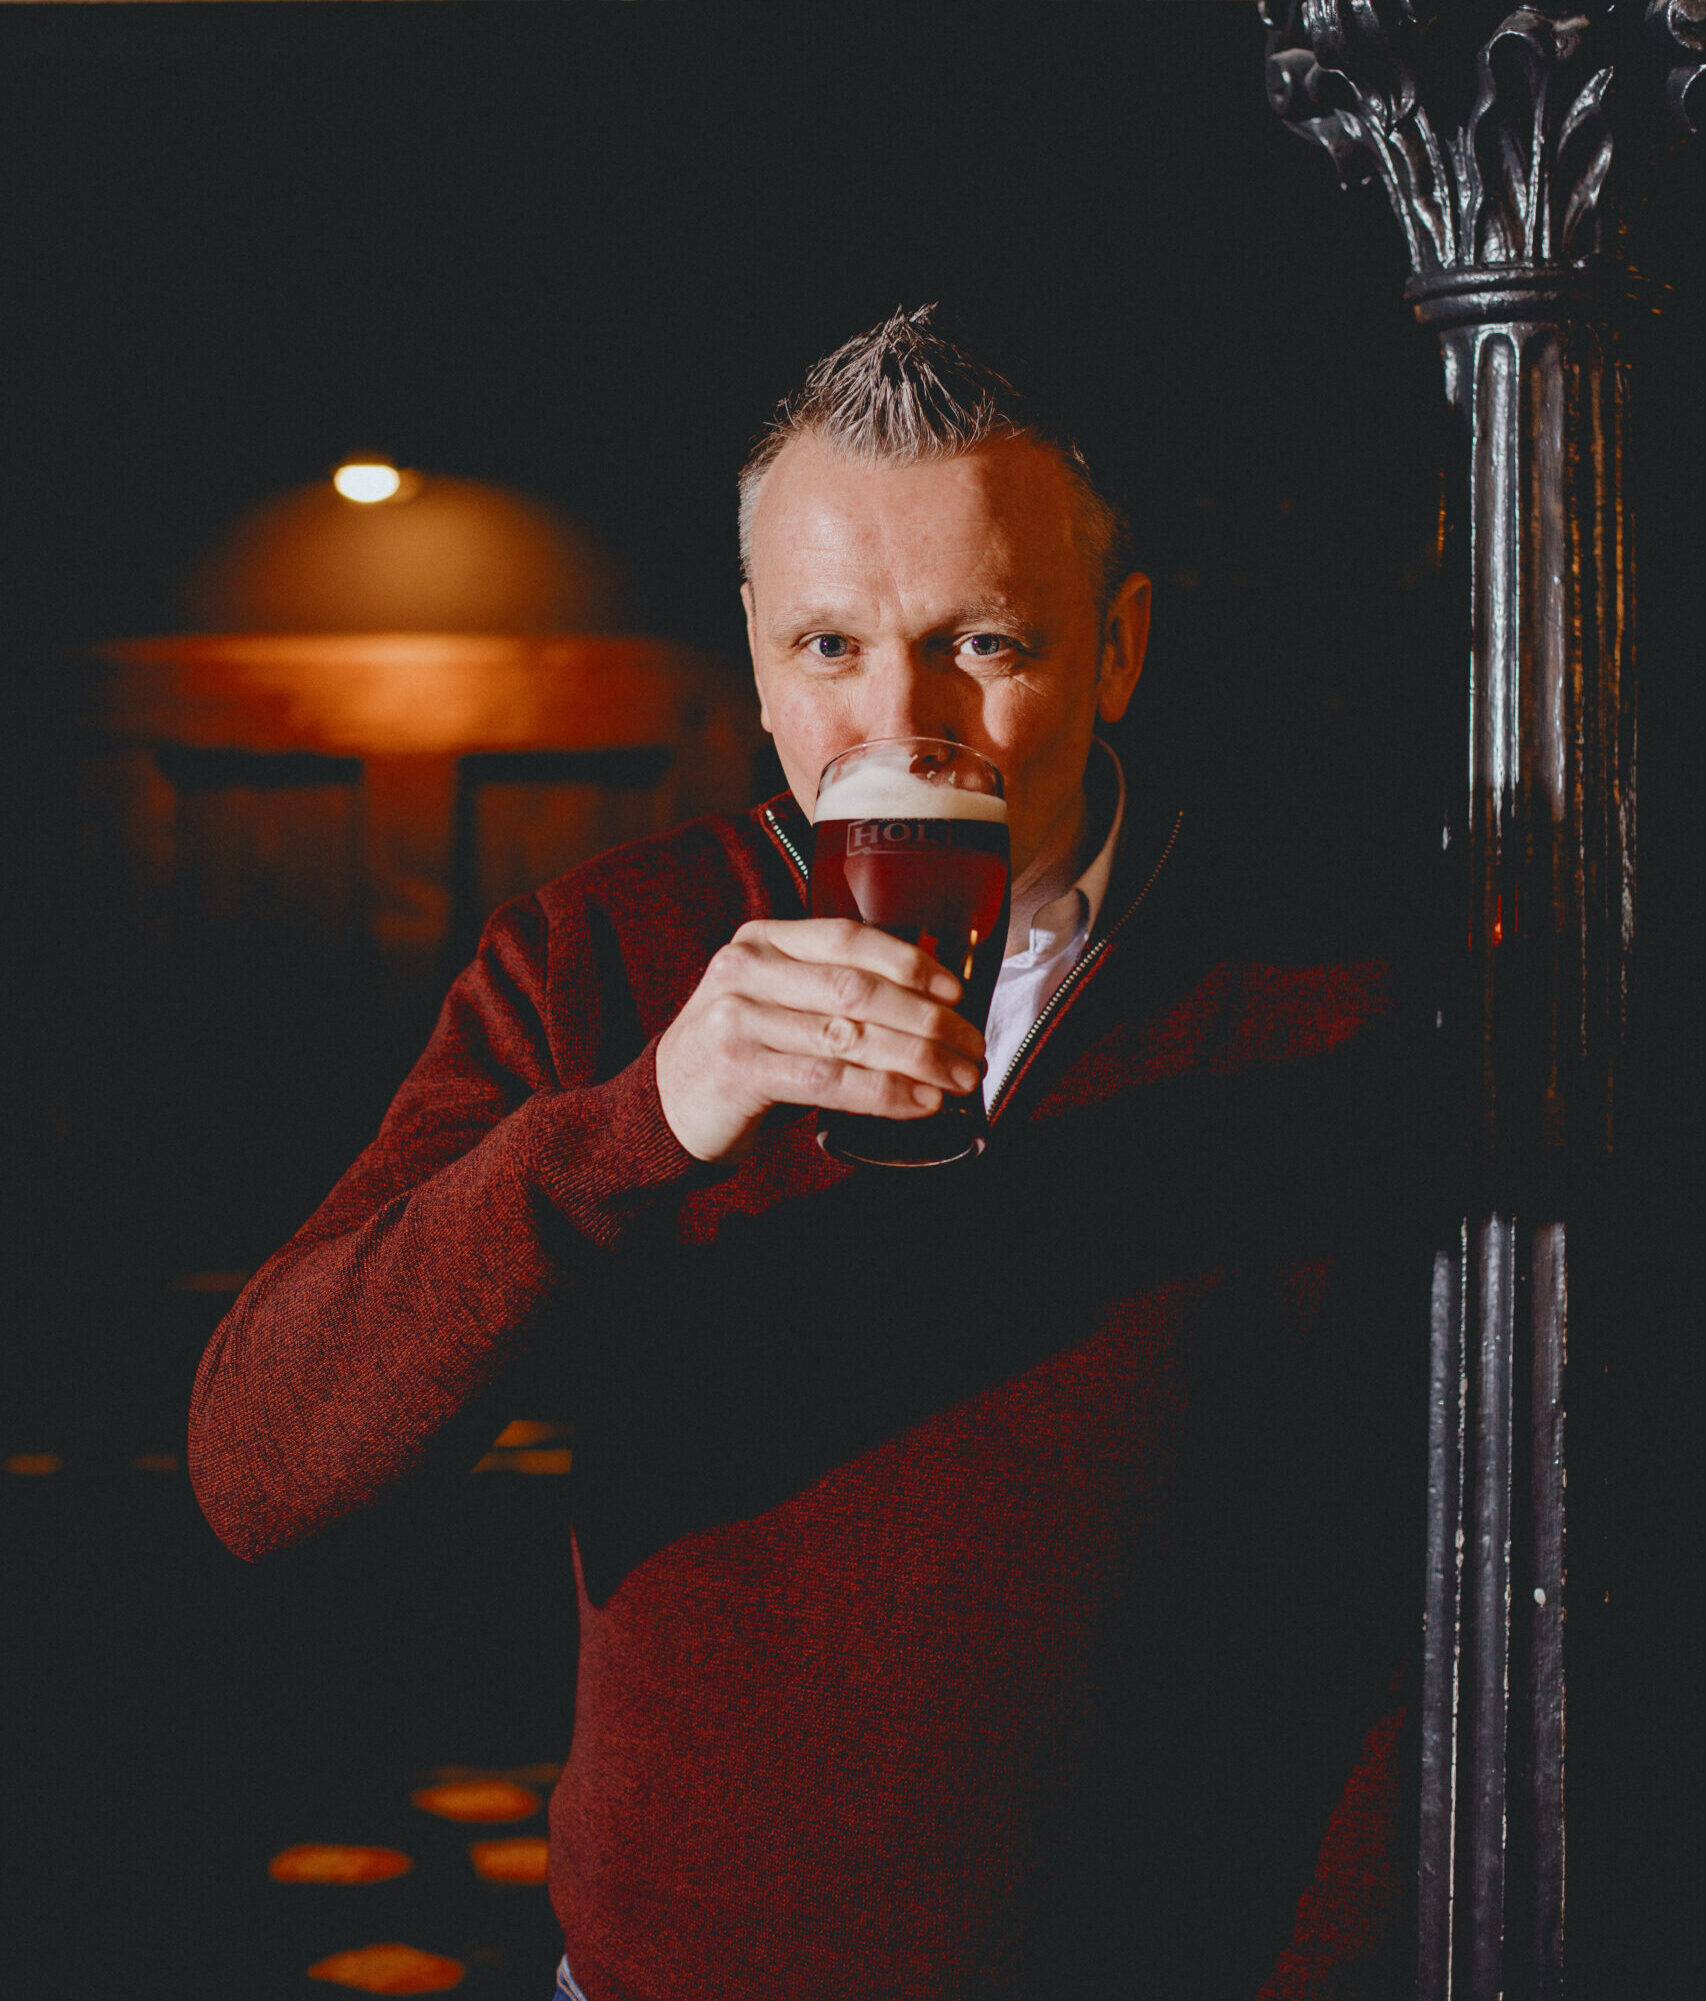 A man stood up dressed in red drinking Bitter.